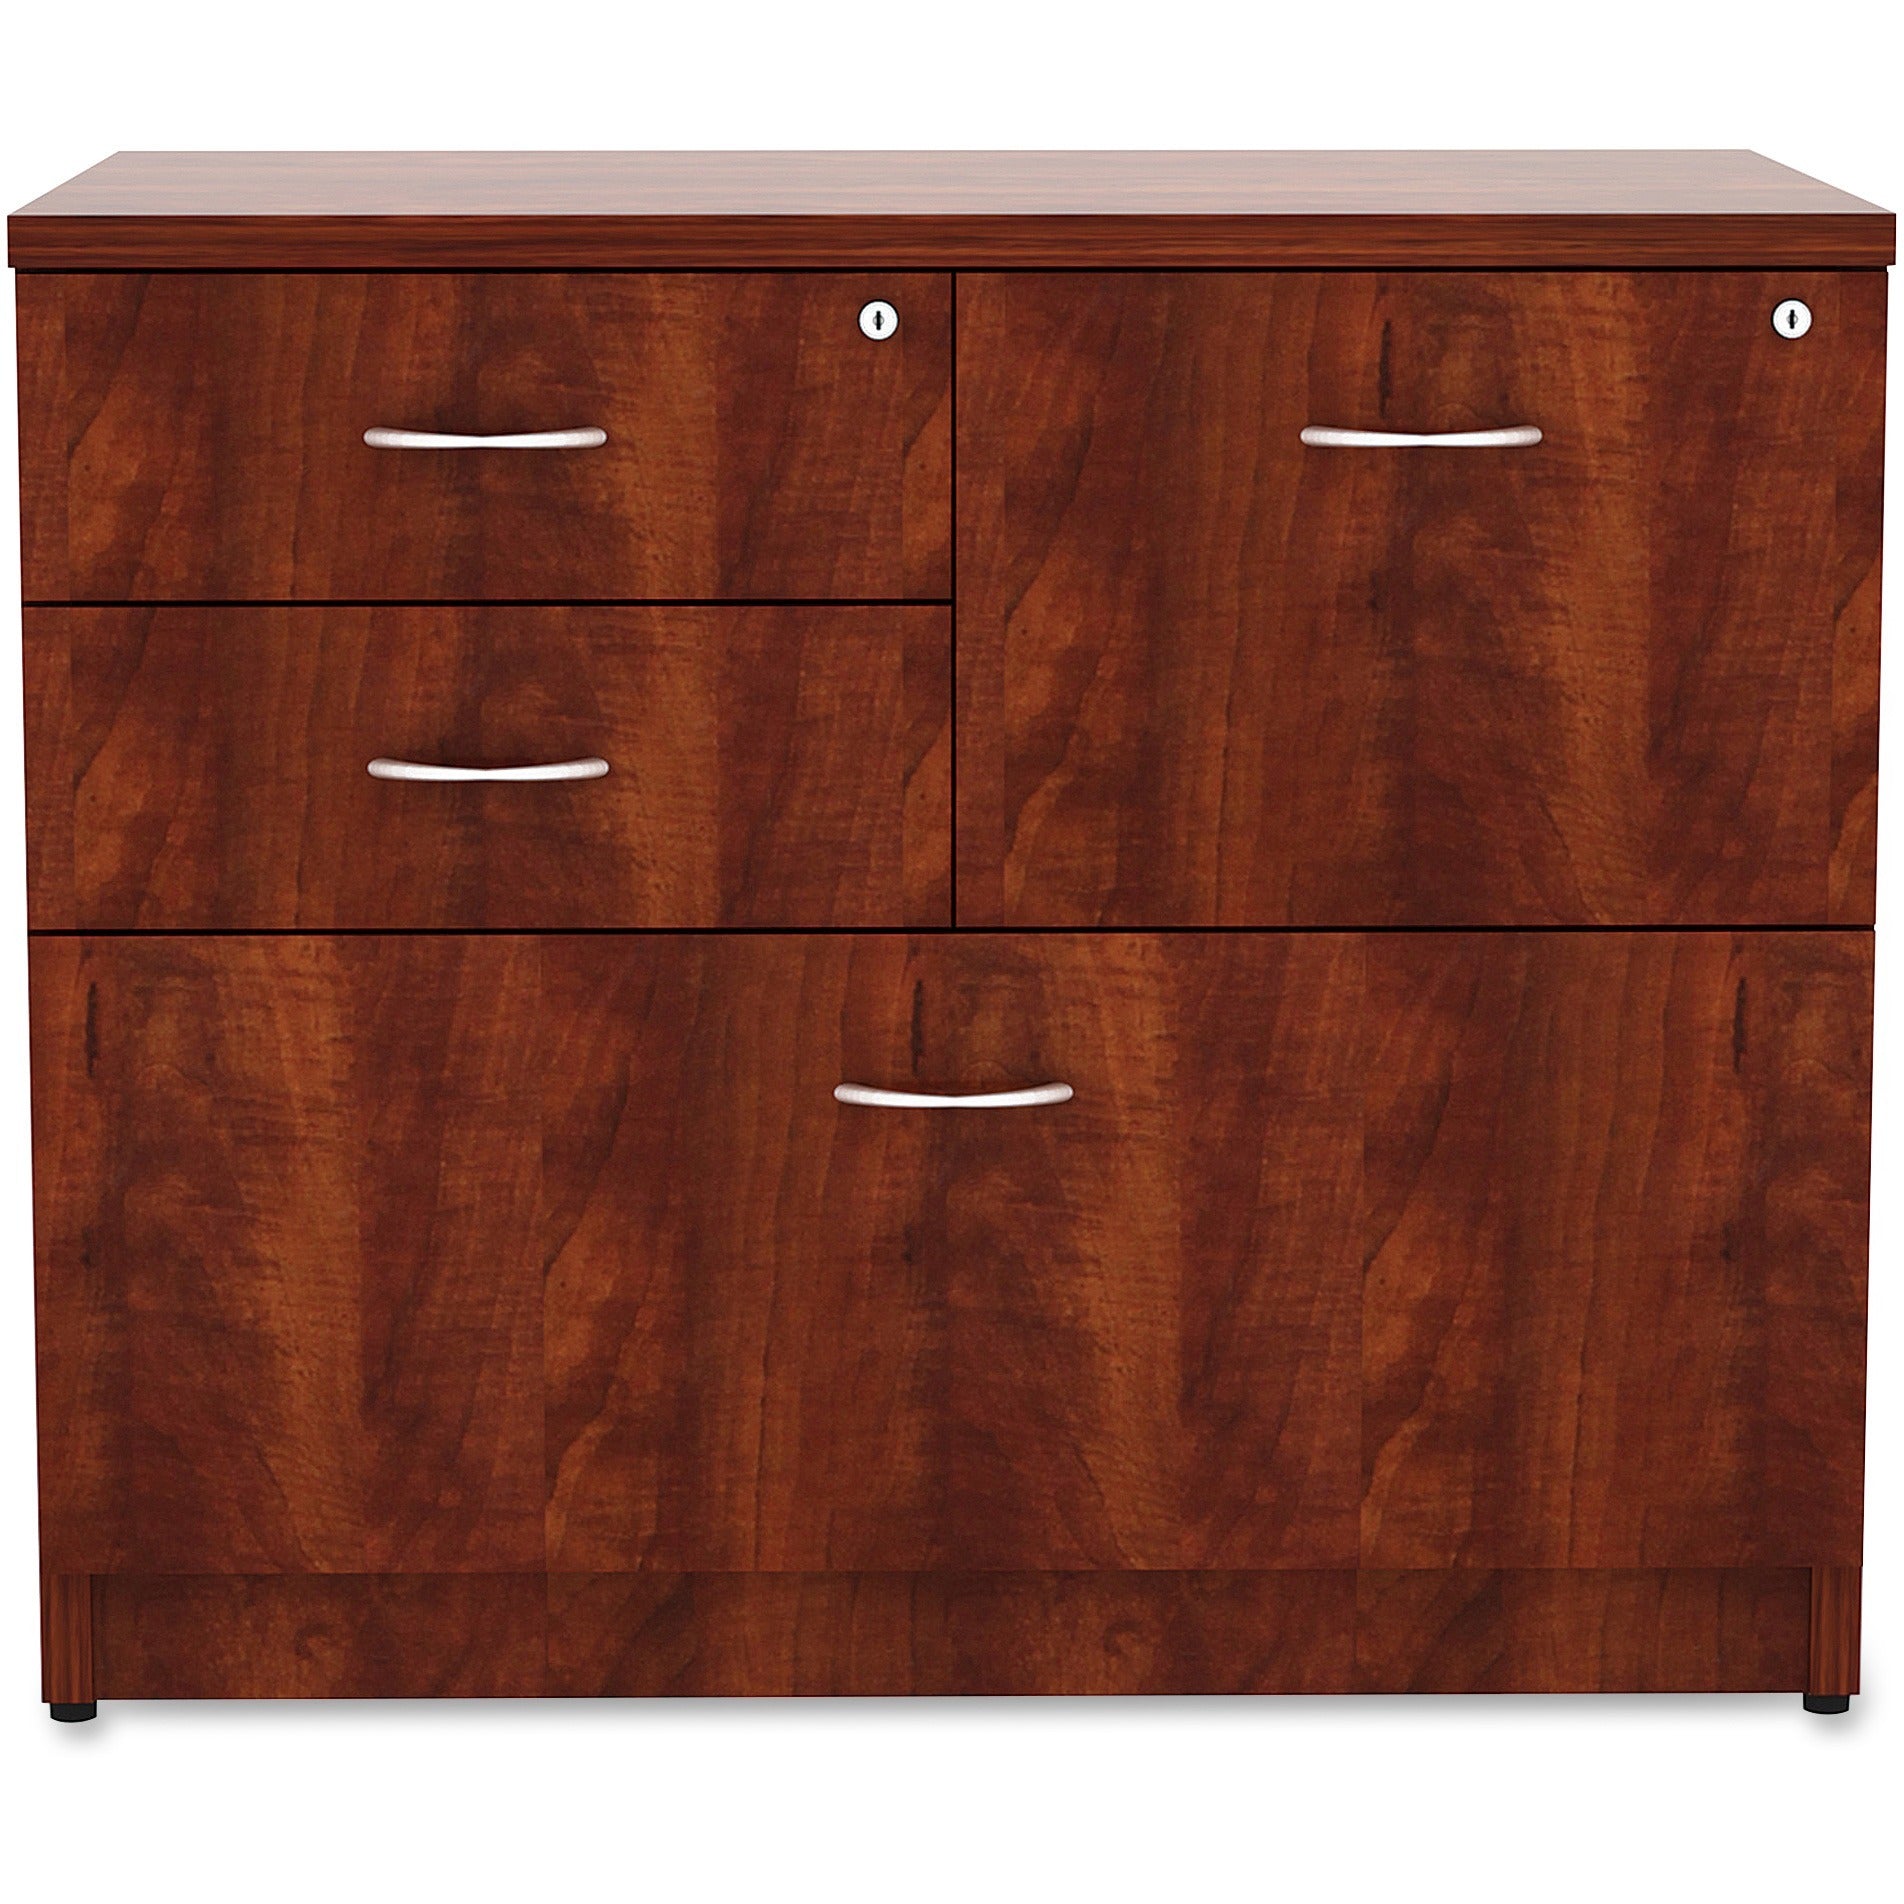 lorell-essentials-series-box-box-file-lateral-file-1-side-panel-01-edge-355-x-22295-lateral-file-4-x-box-file-drawers-cherry-laminate-table-top-versatile-ball-bearing-glide-drawer-extension-security-lock-durable-adjustable-l_llr69540 - 2